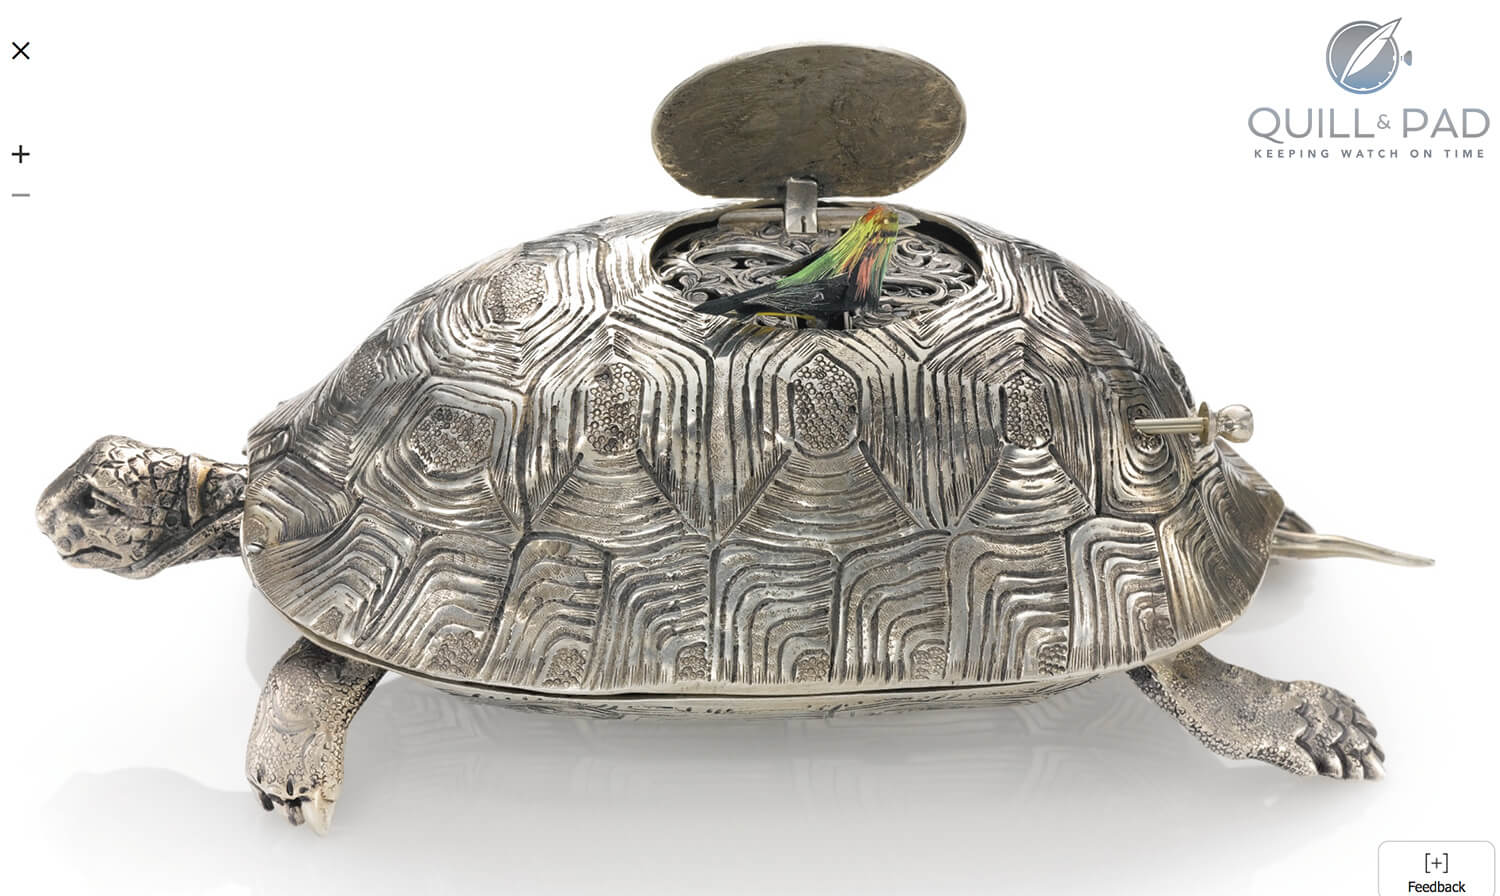 Key-wound silver turtle automaton with a singing bird in its shell made in Germany in about 1975 (photo courtesy Sothebys)